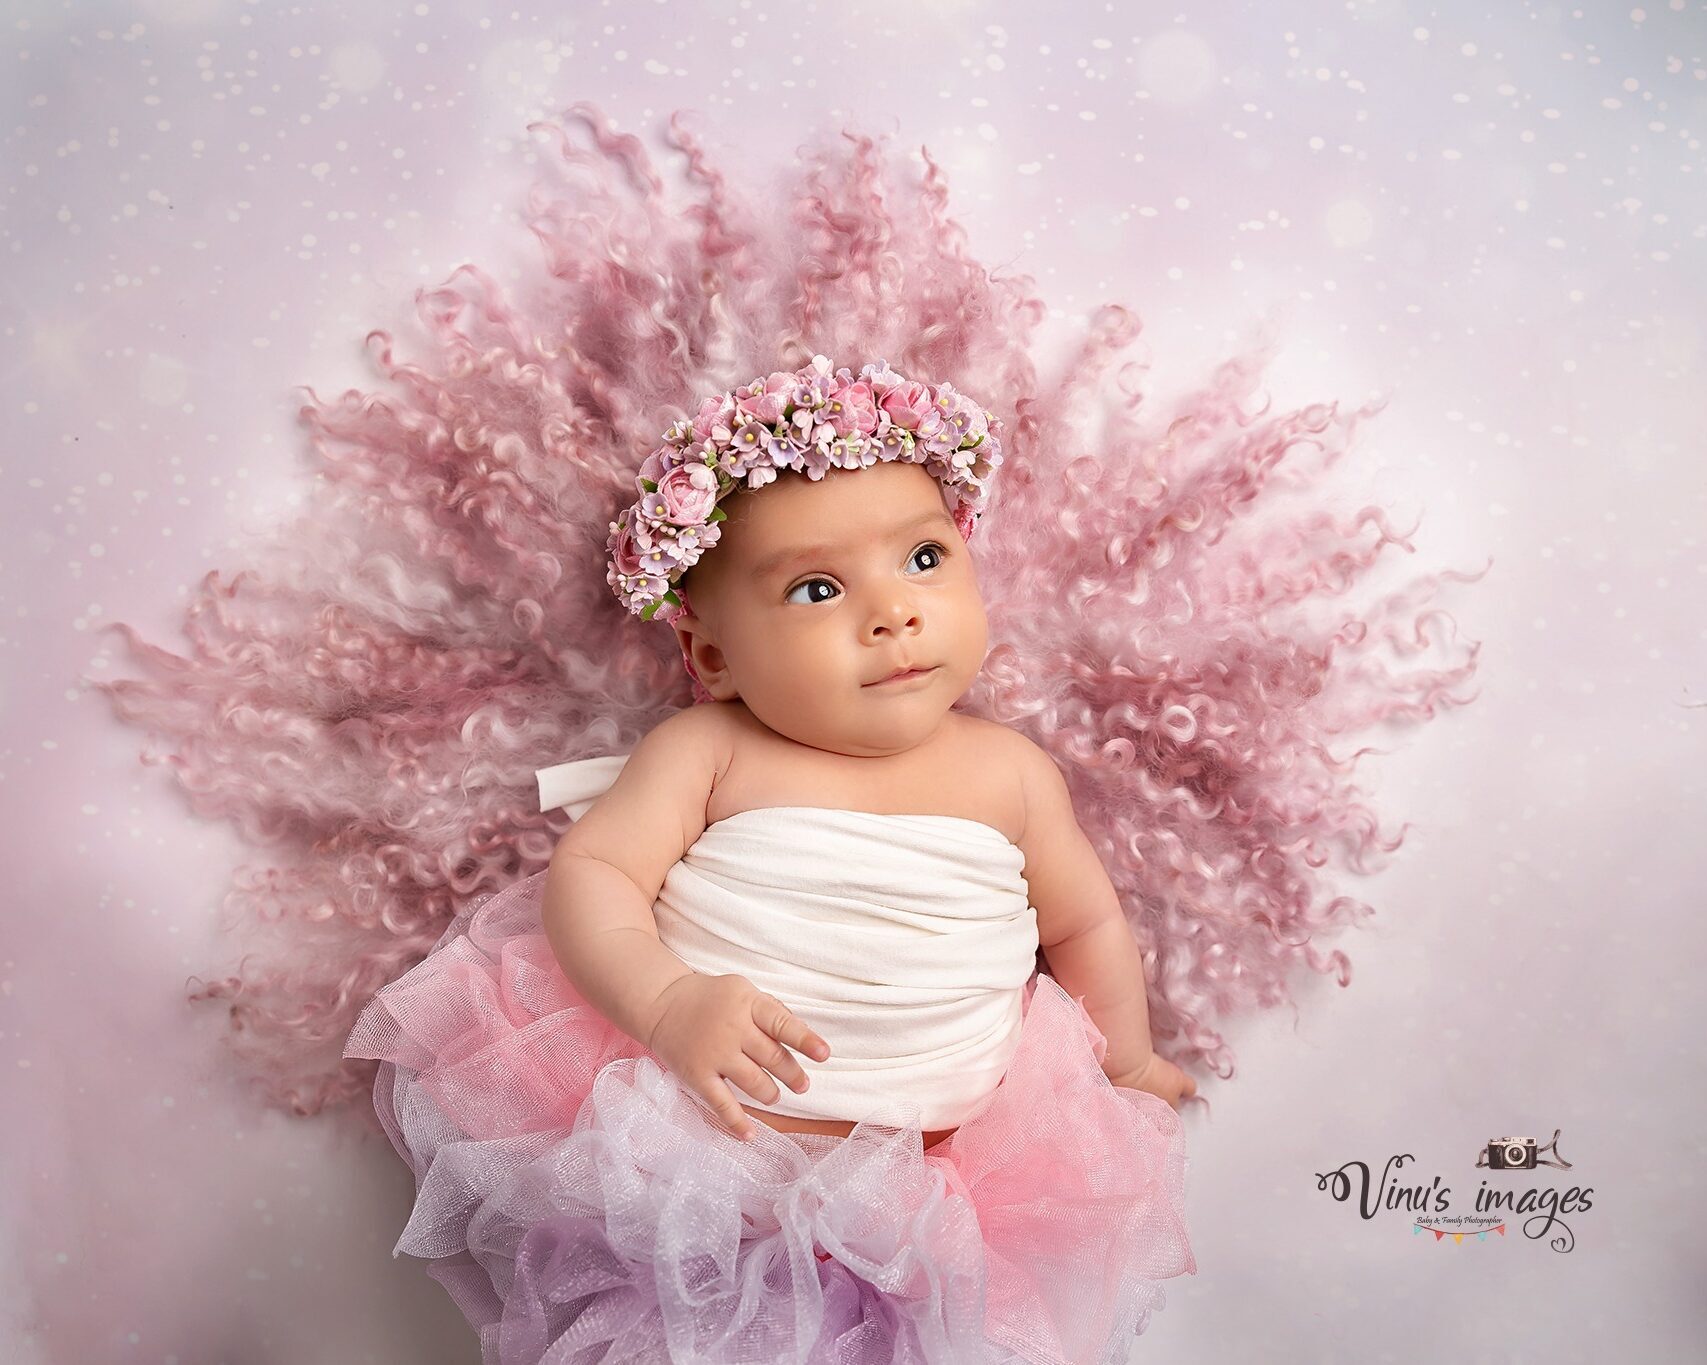 2 month baby picture | Baby milestones pictures, Monthly baby pictures, Baby  milestone photos